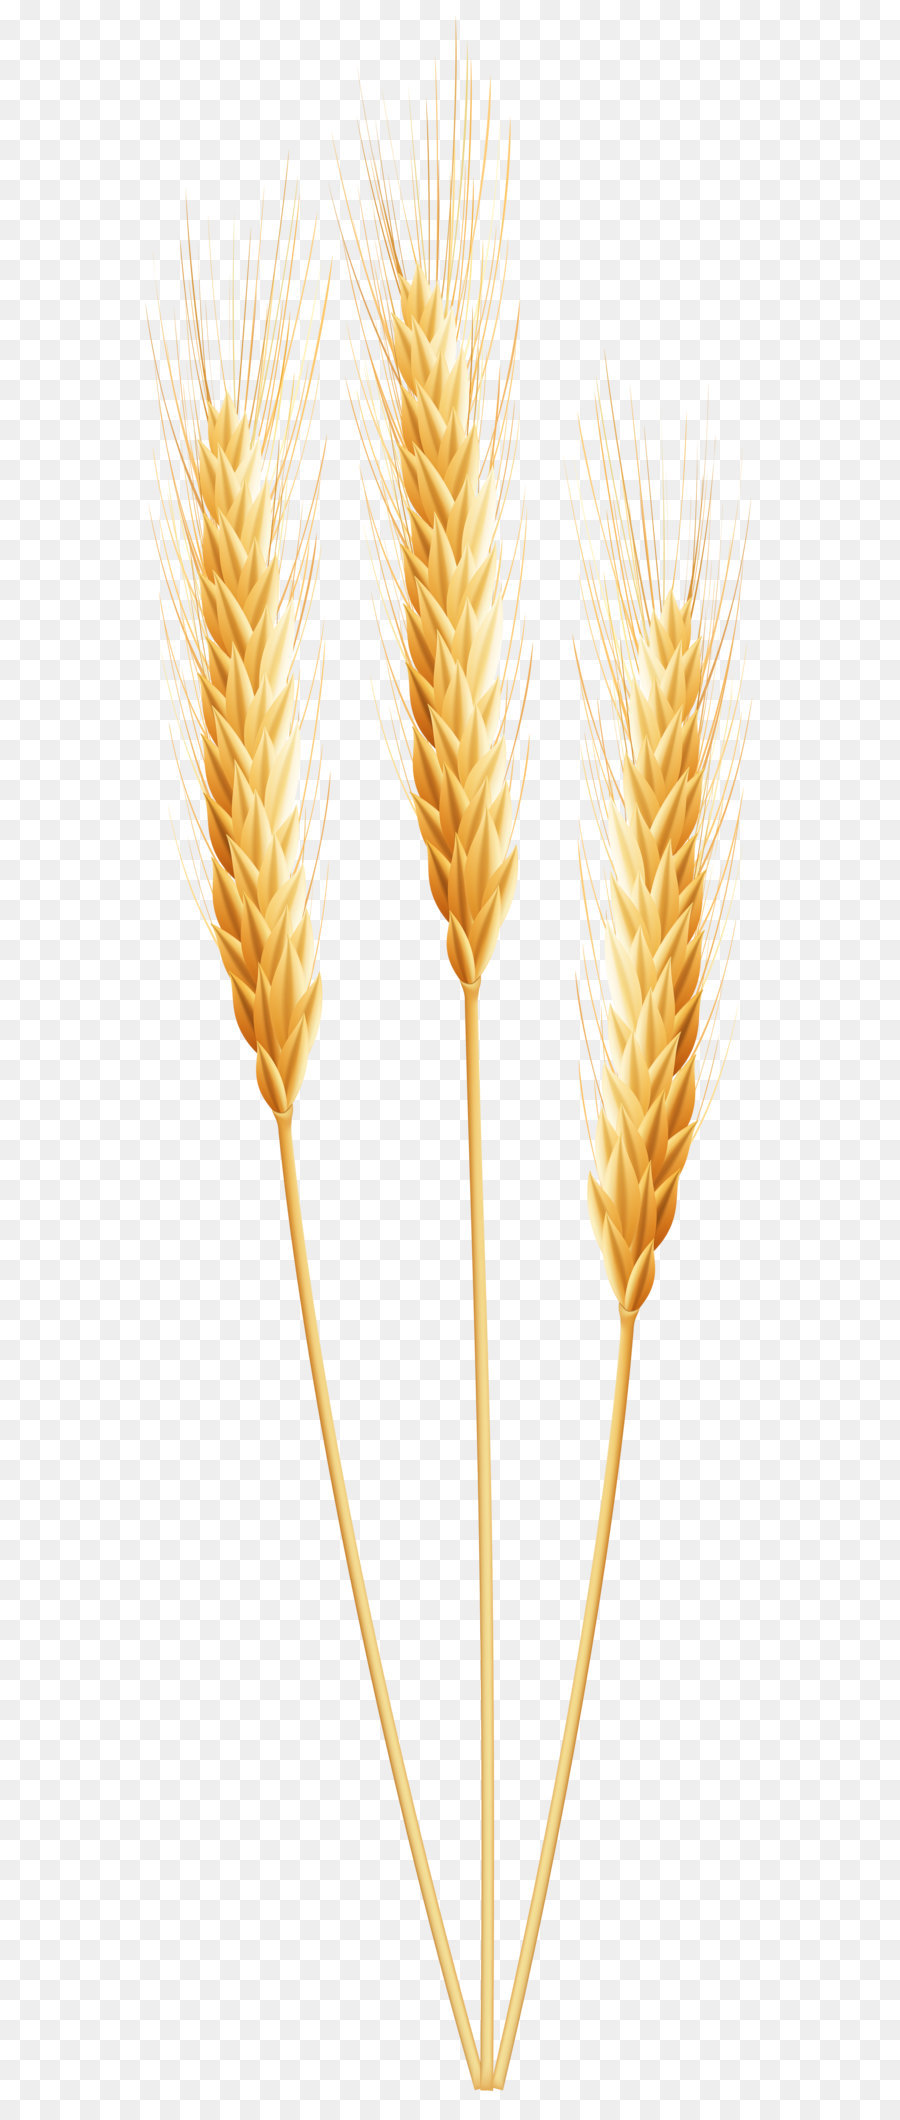 Emmer cereal germ png. Wheat clipart